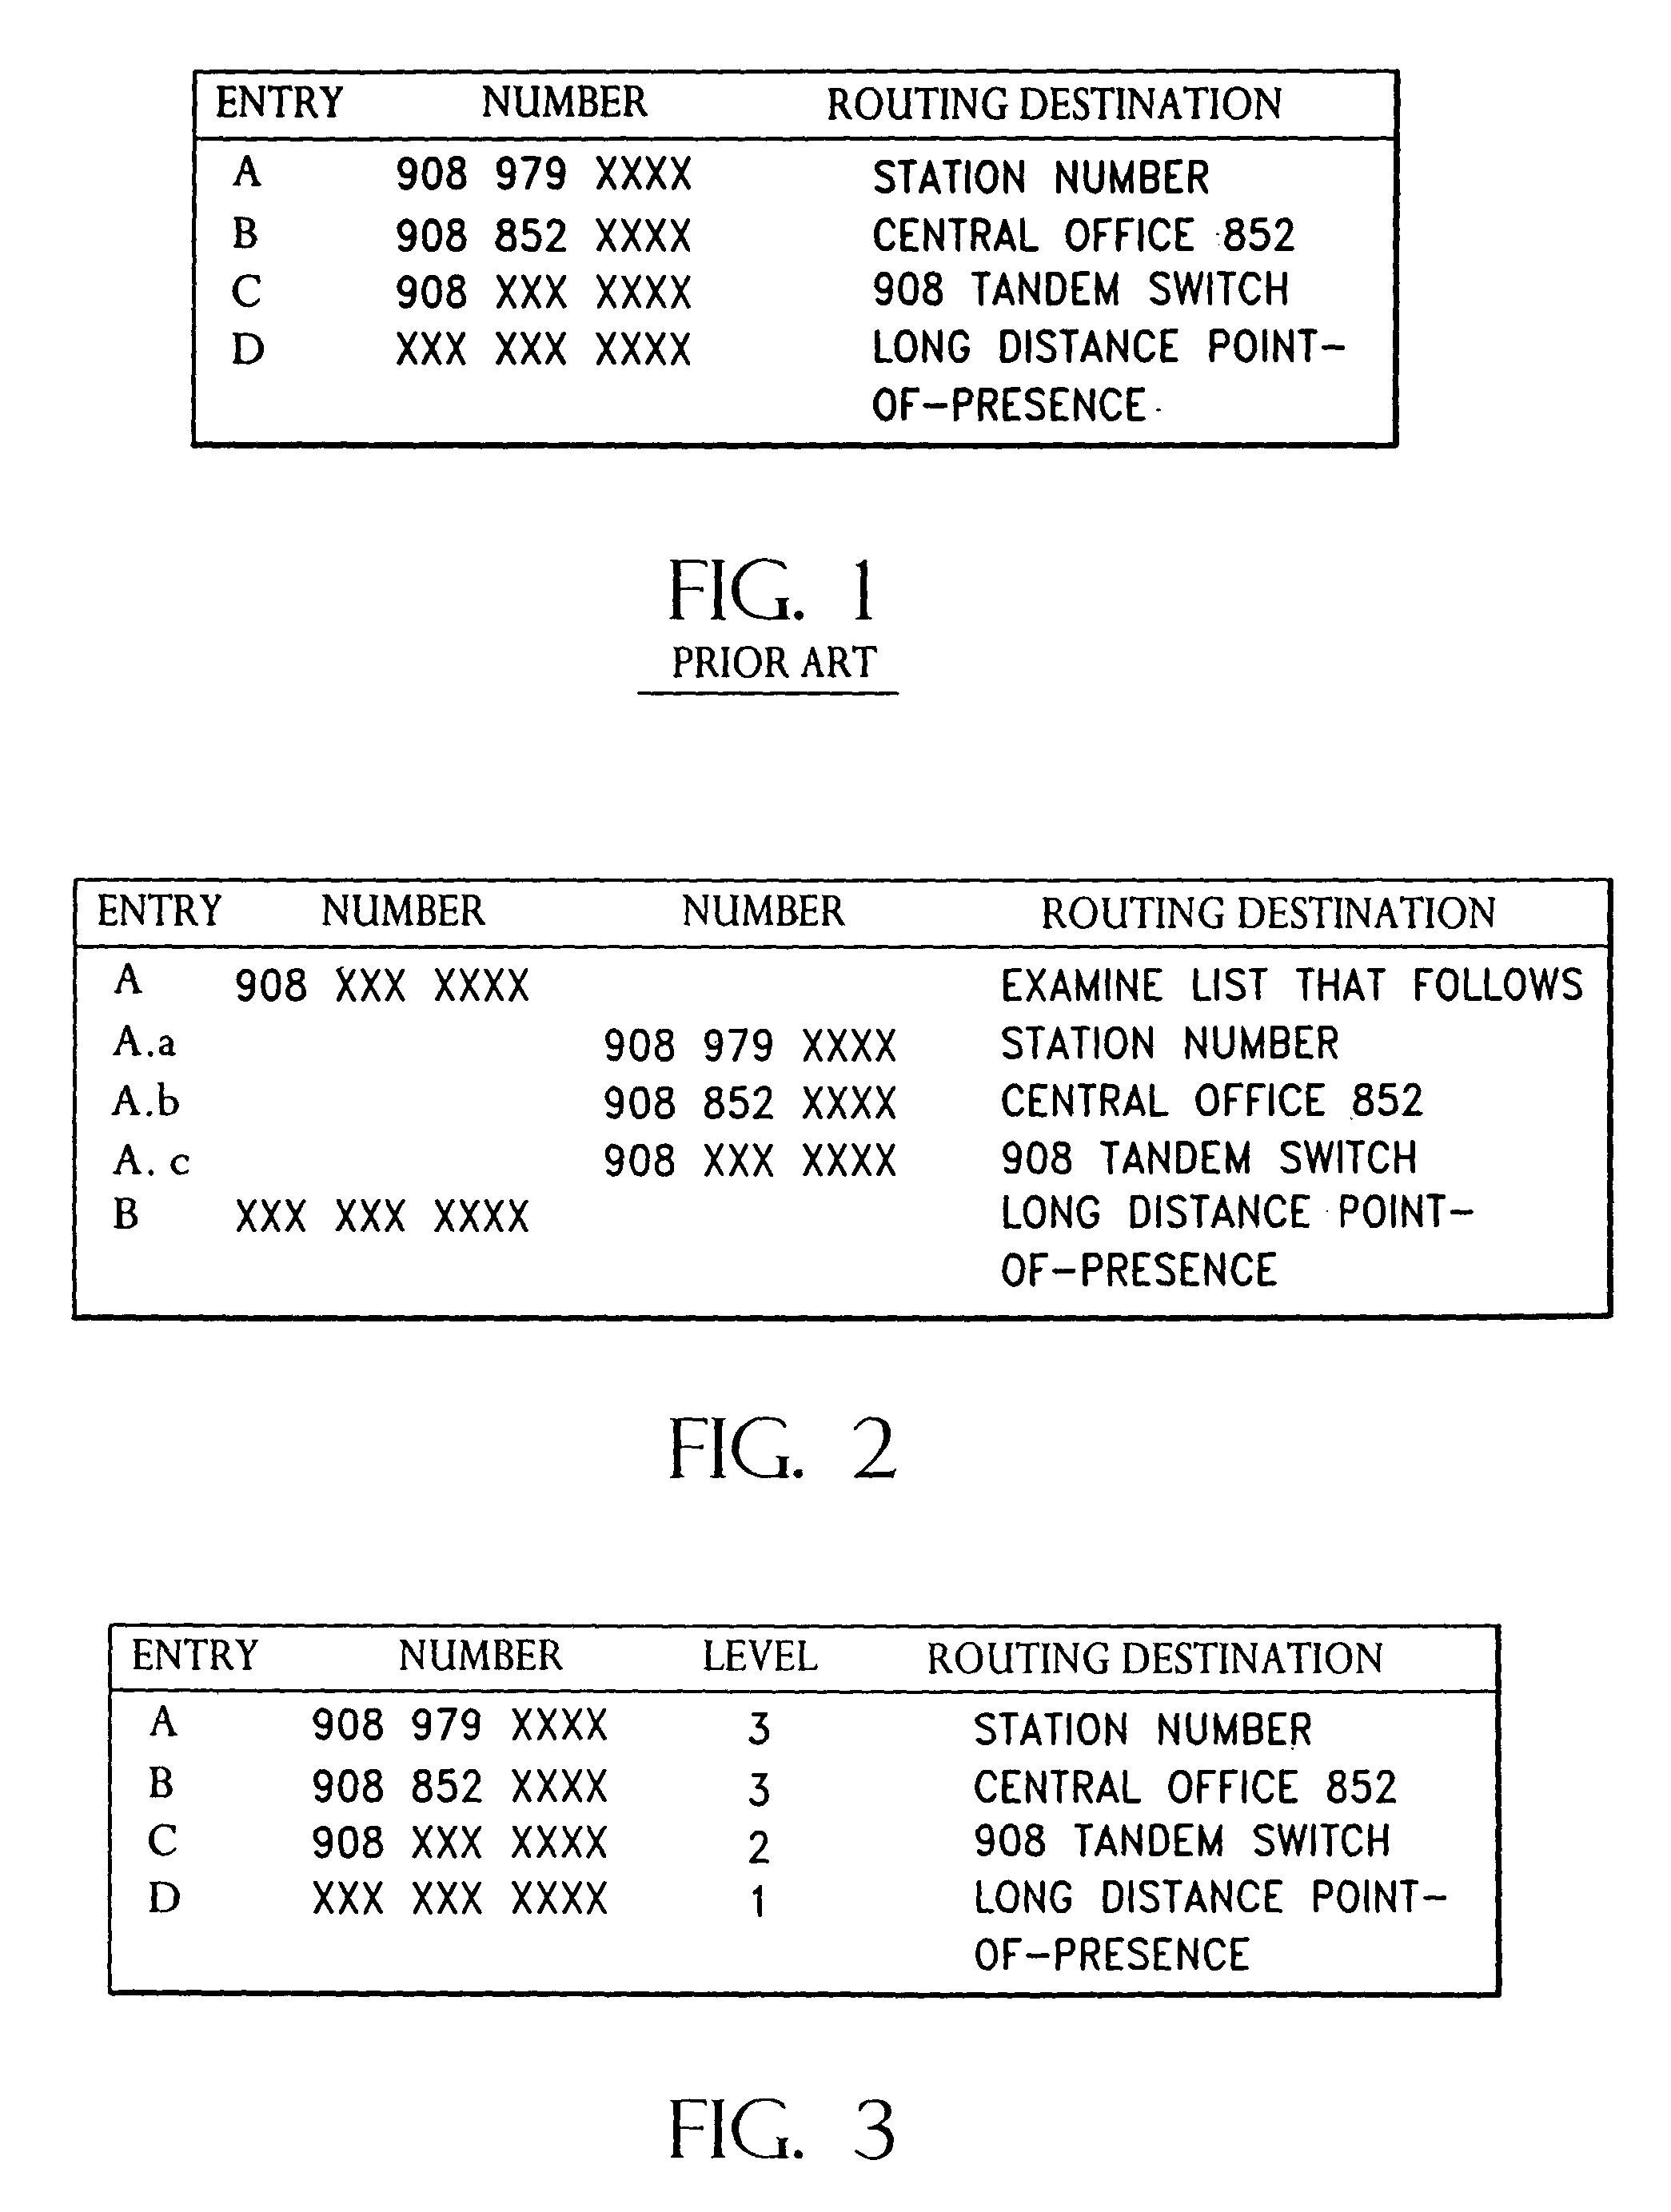 Partially-ordered cams used in ternary hierarchical address searching/sorting